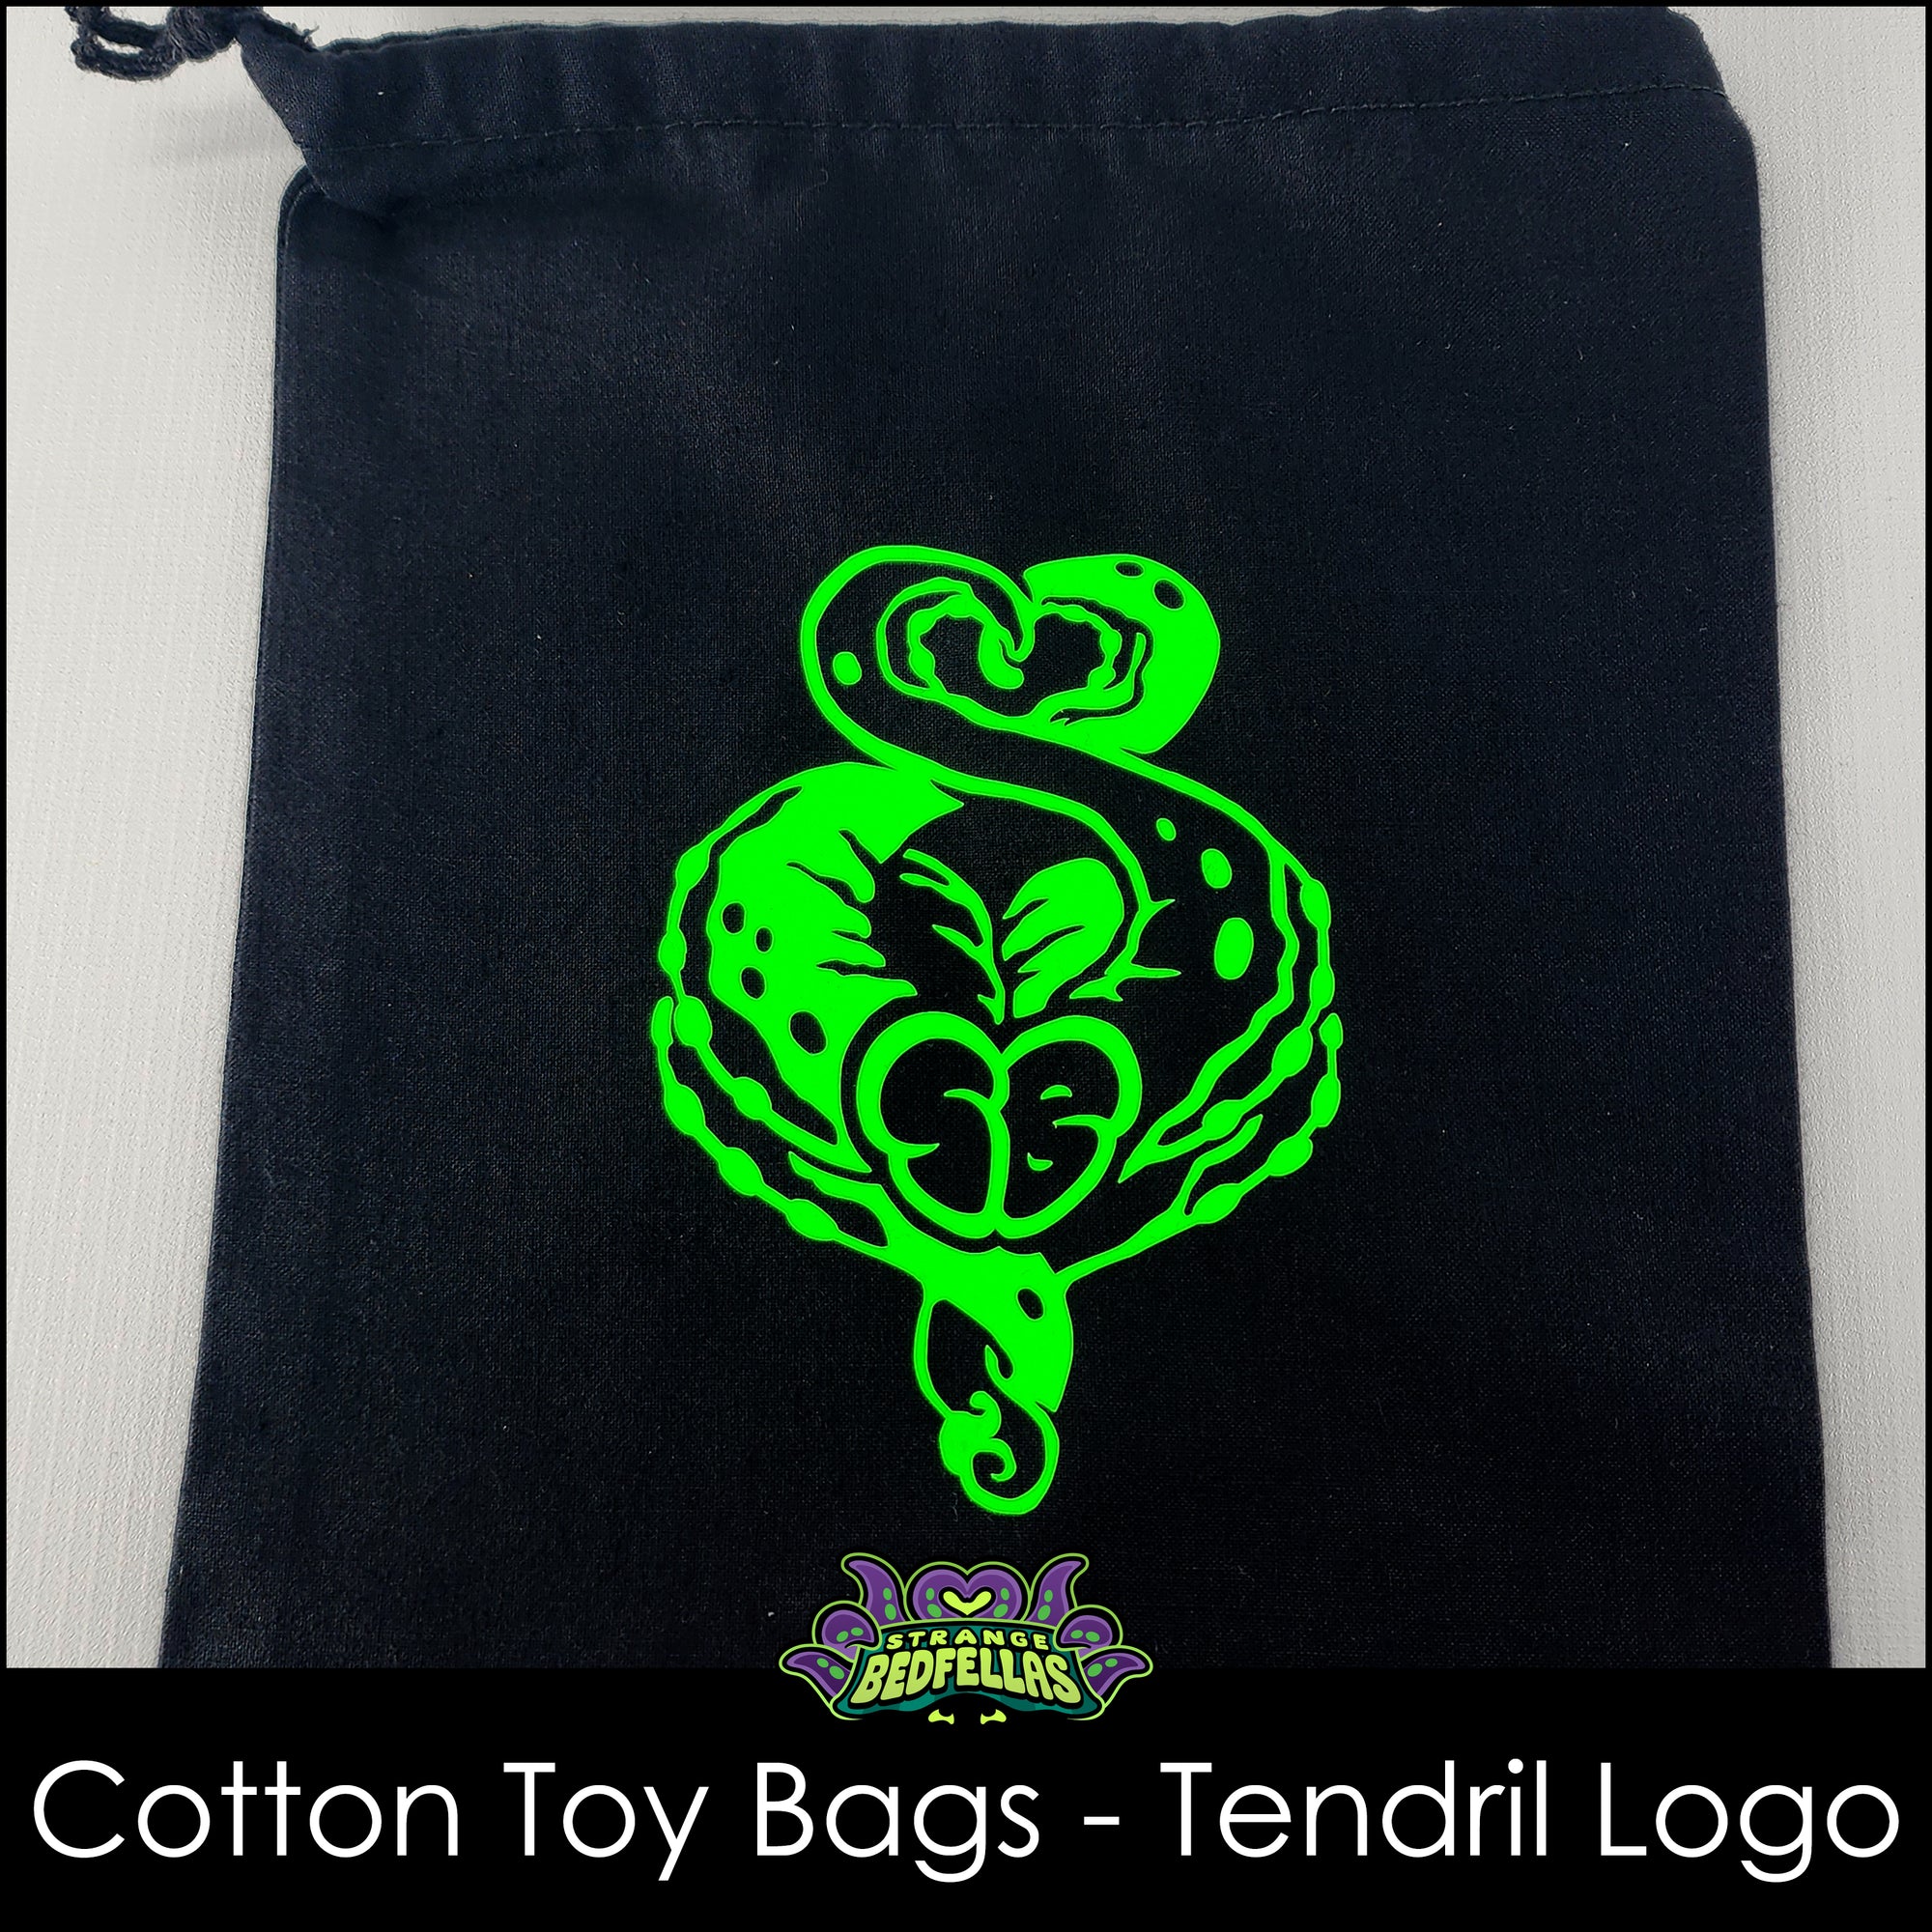 Cotton Toy Bags - Tendril Logo